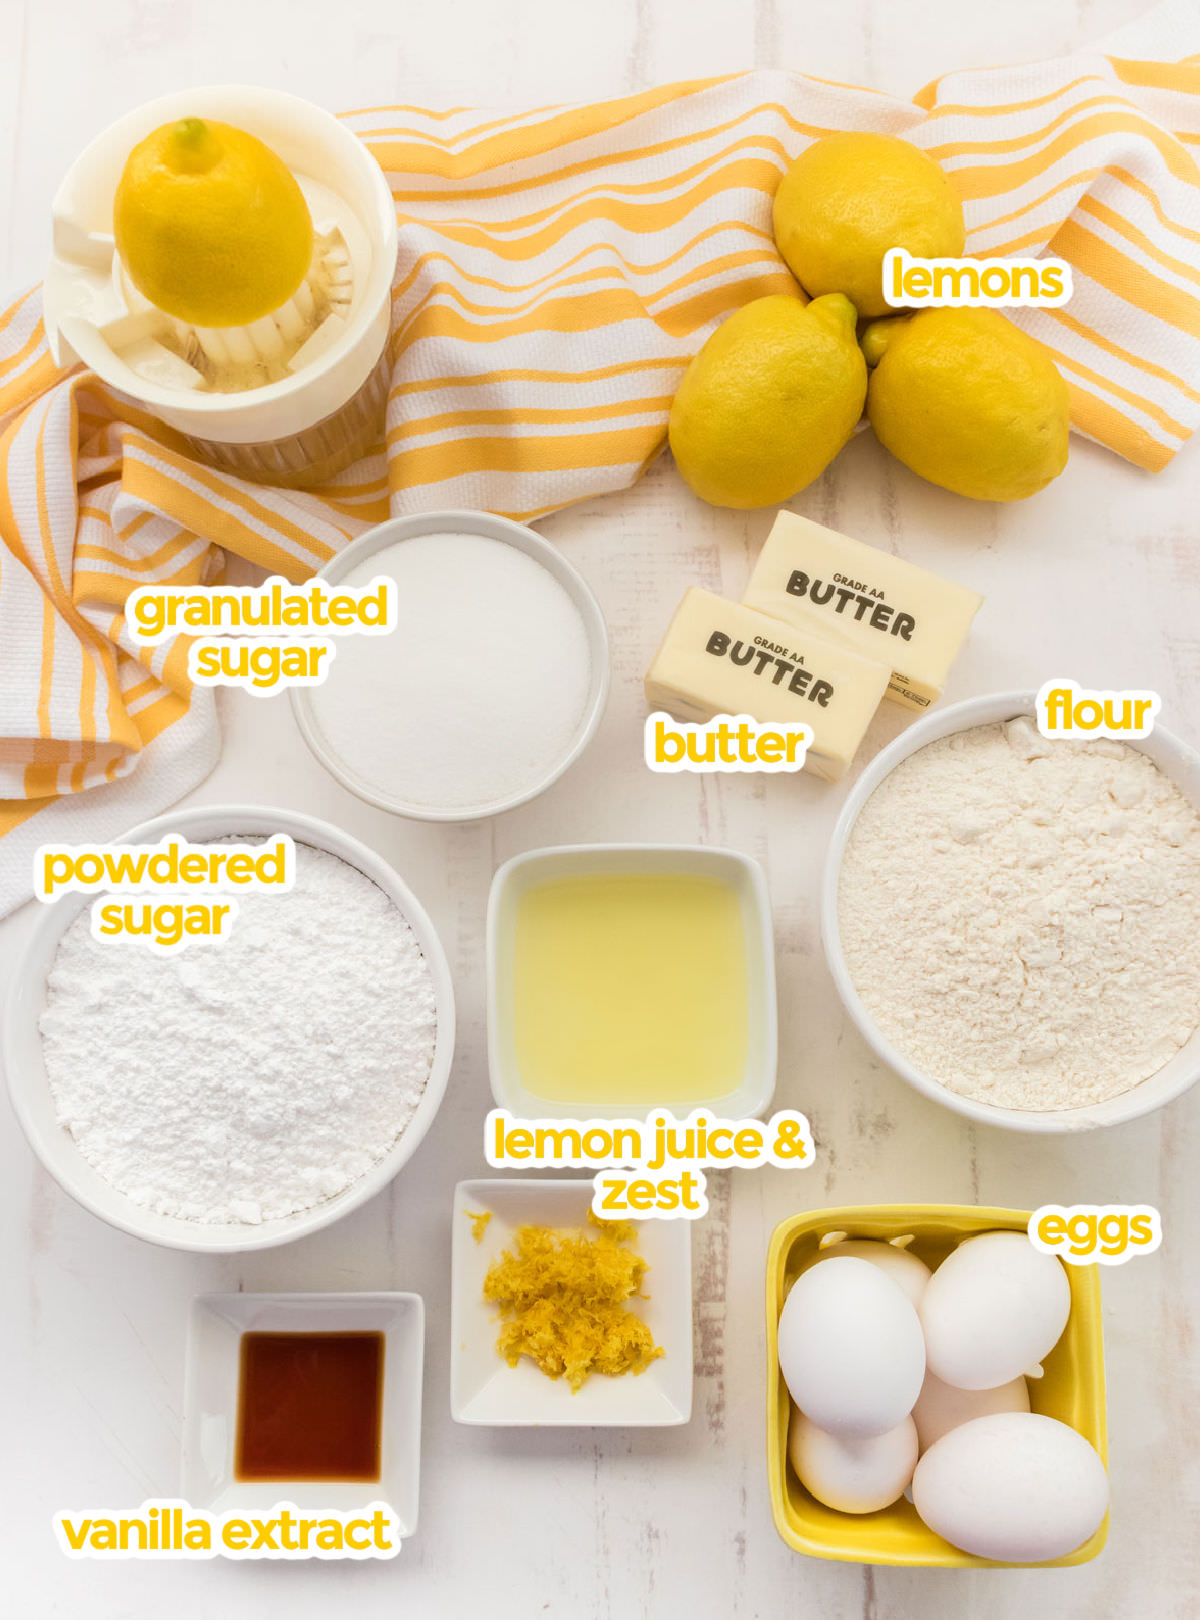 All the ingredients you will need to make Lemon Pound Cake including lemons, butter, granulated sugar, flour, powdered sugar, lemon juice and zest, eggs and vanilla.